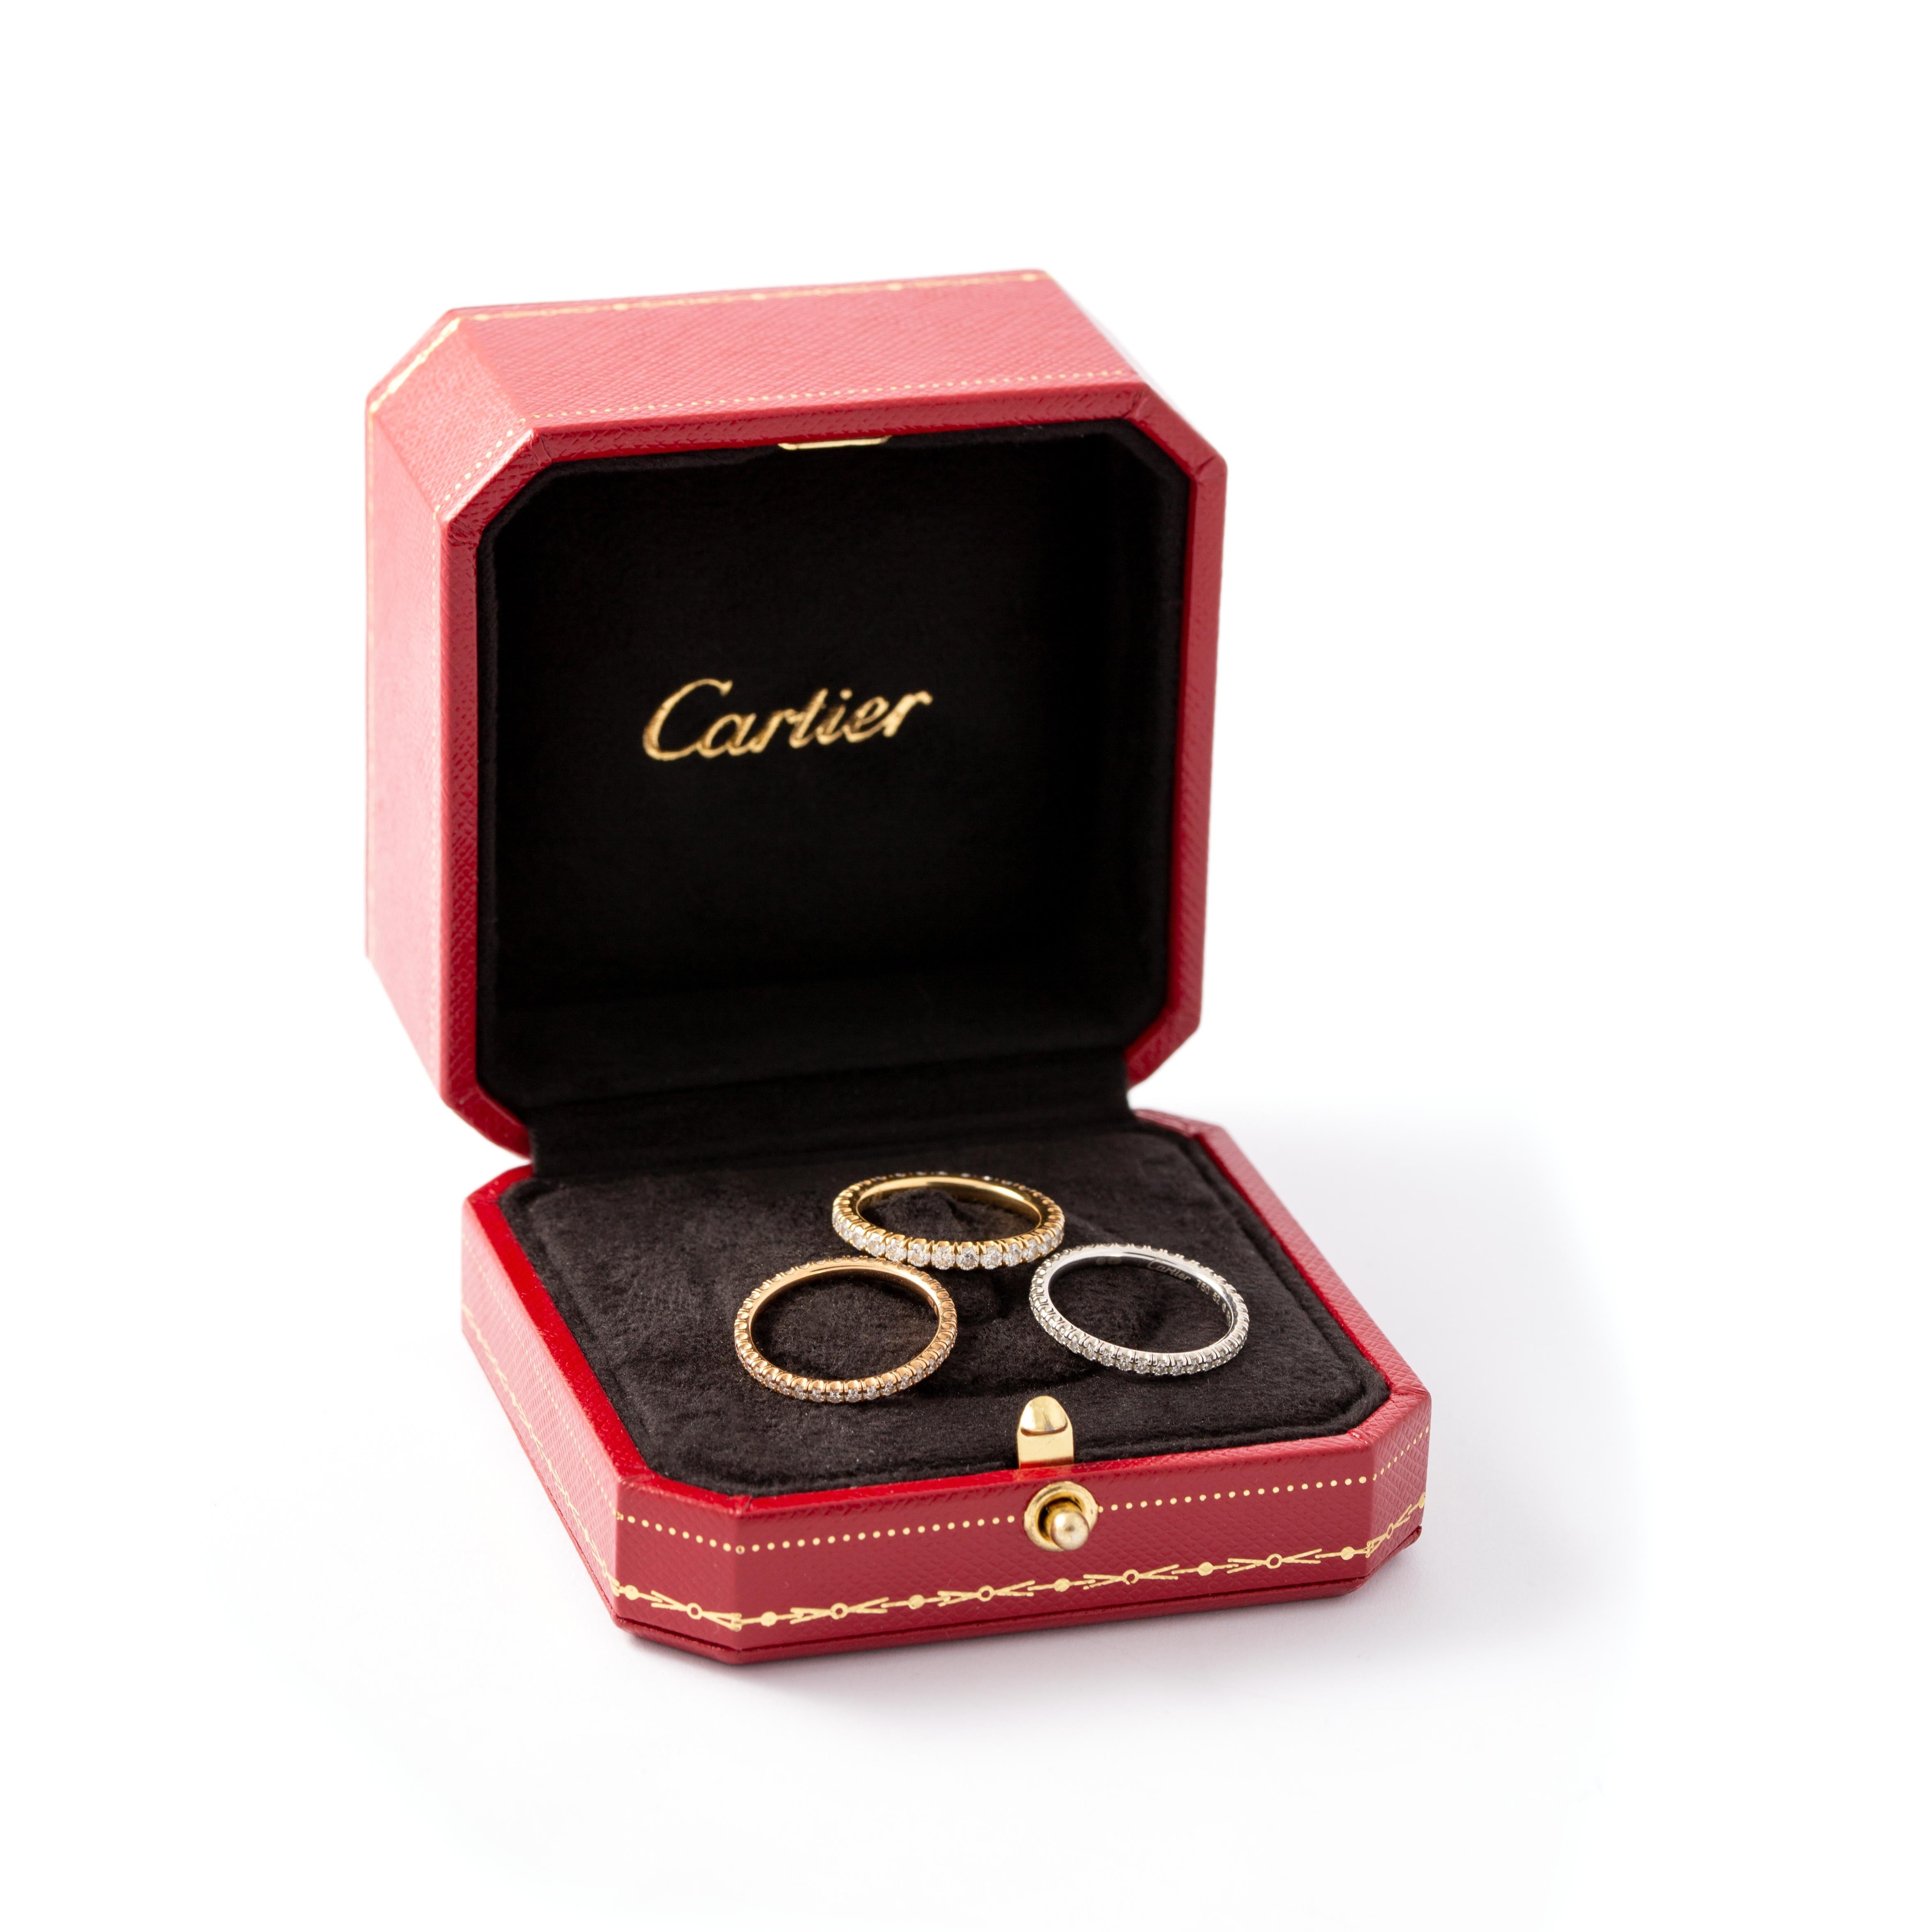 Cartier Diamond Rings For Sale 2